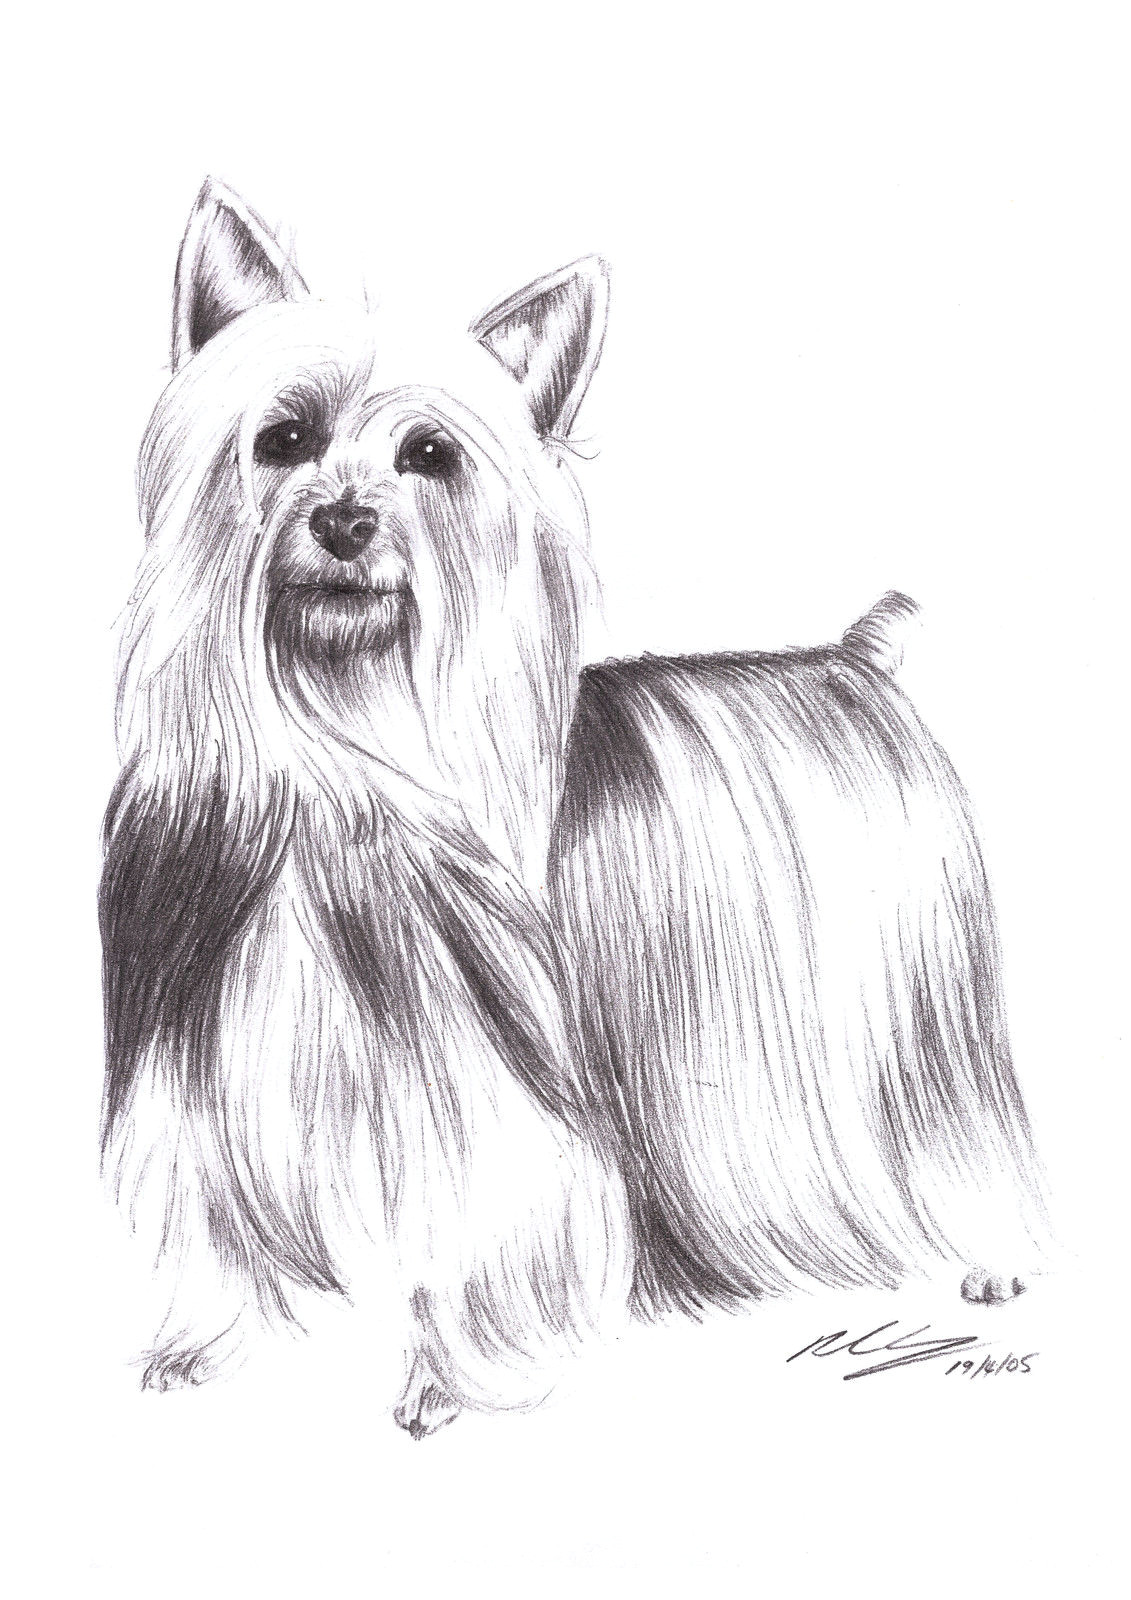 9 5 aud silky terrier dog standing pet pencil art signed a4 giclee print ebay collectibles